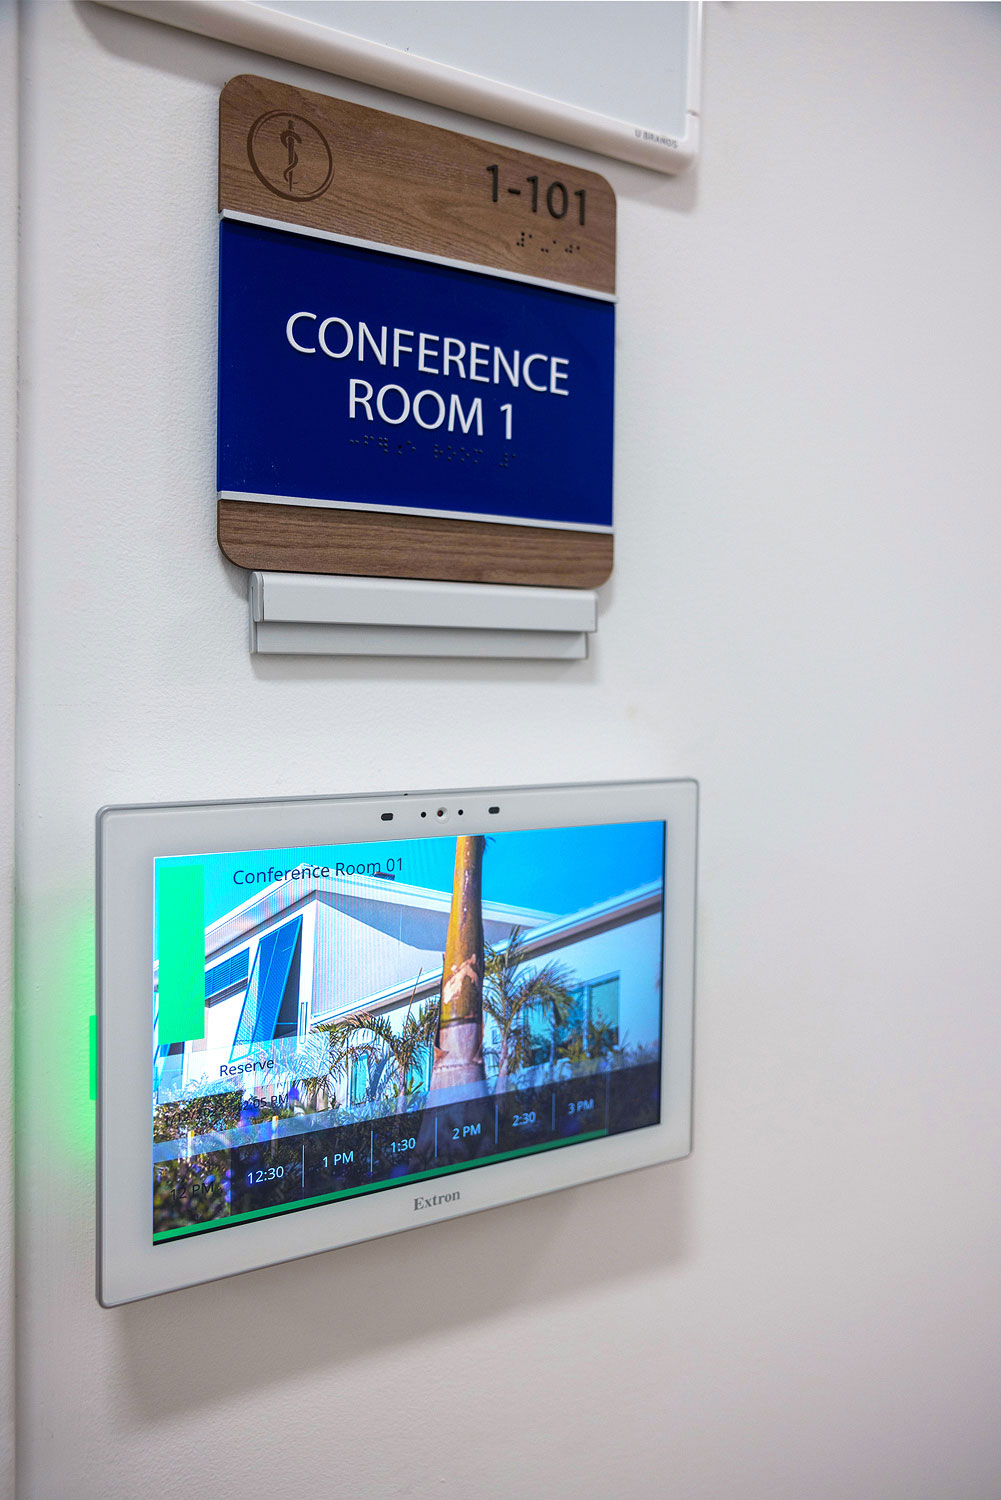 Thumbnail - TLS 1025M room scheduling systems provide room availability in real-time and allow easy reservations for meetings and conferences.